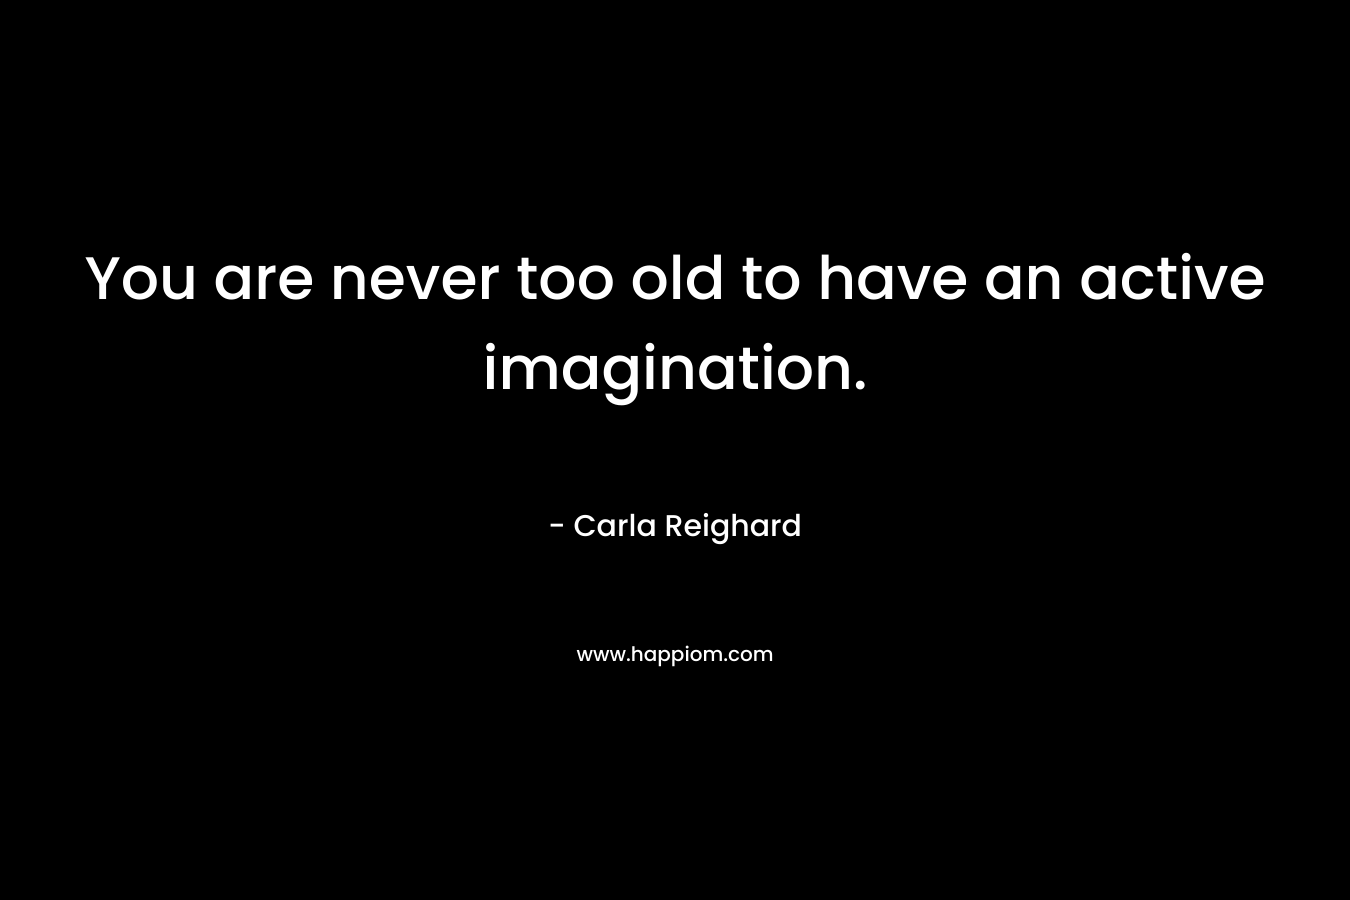 You are never too old to have an active imagination.